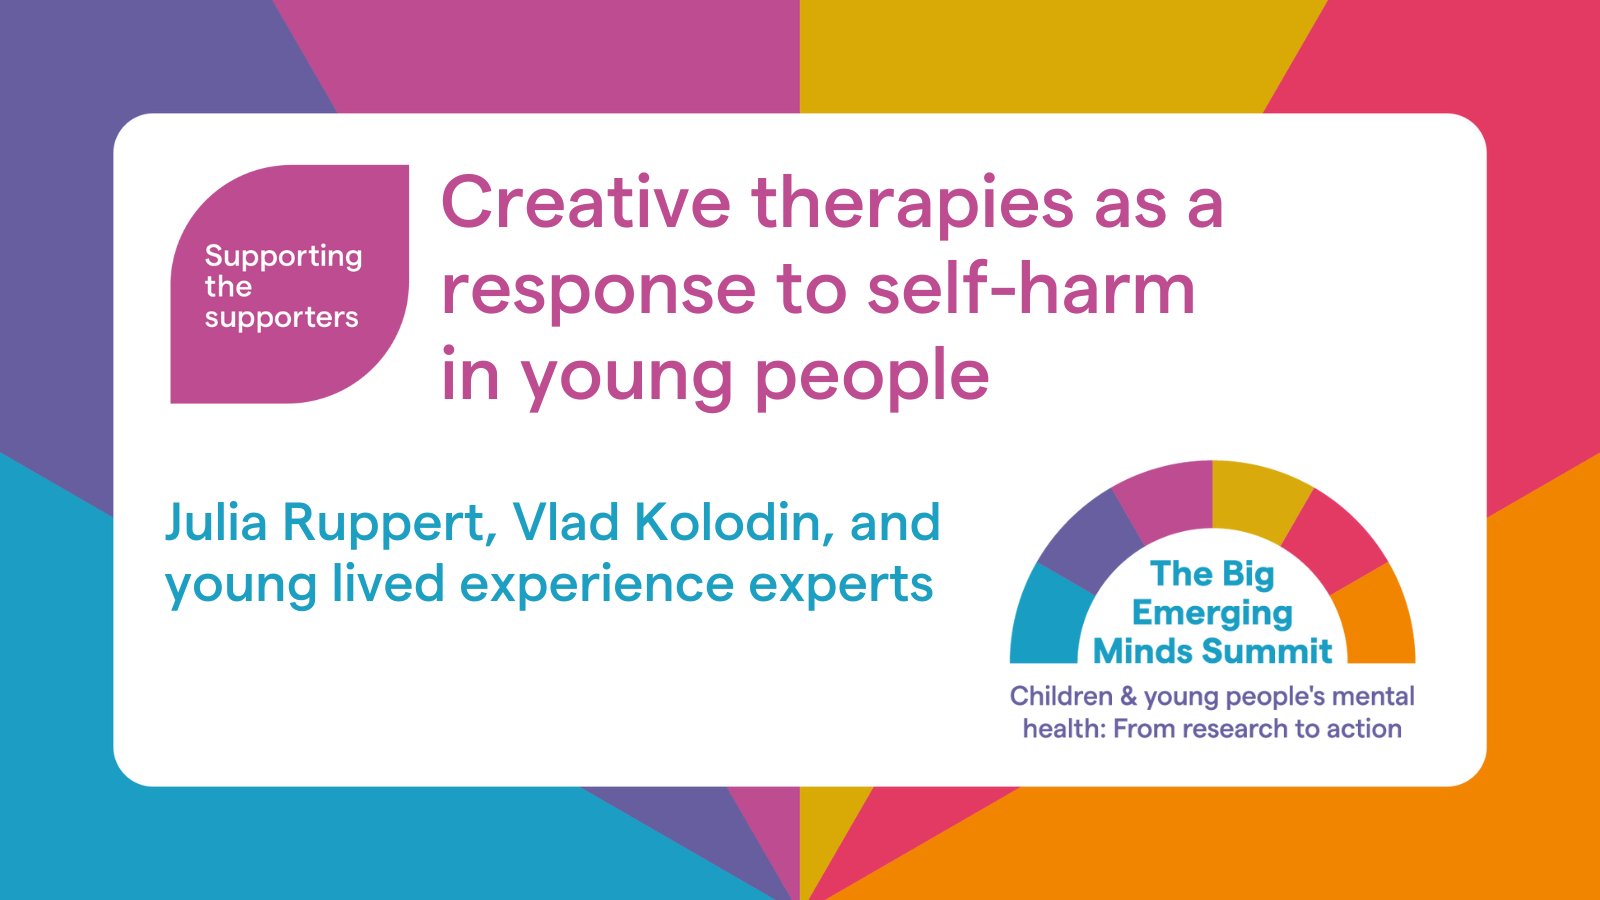 Creative therapies as a response to self-harm in young people